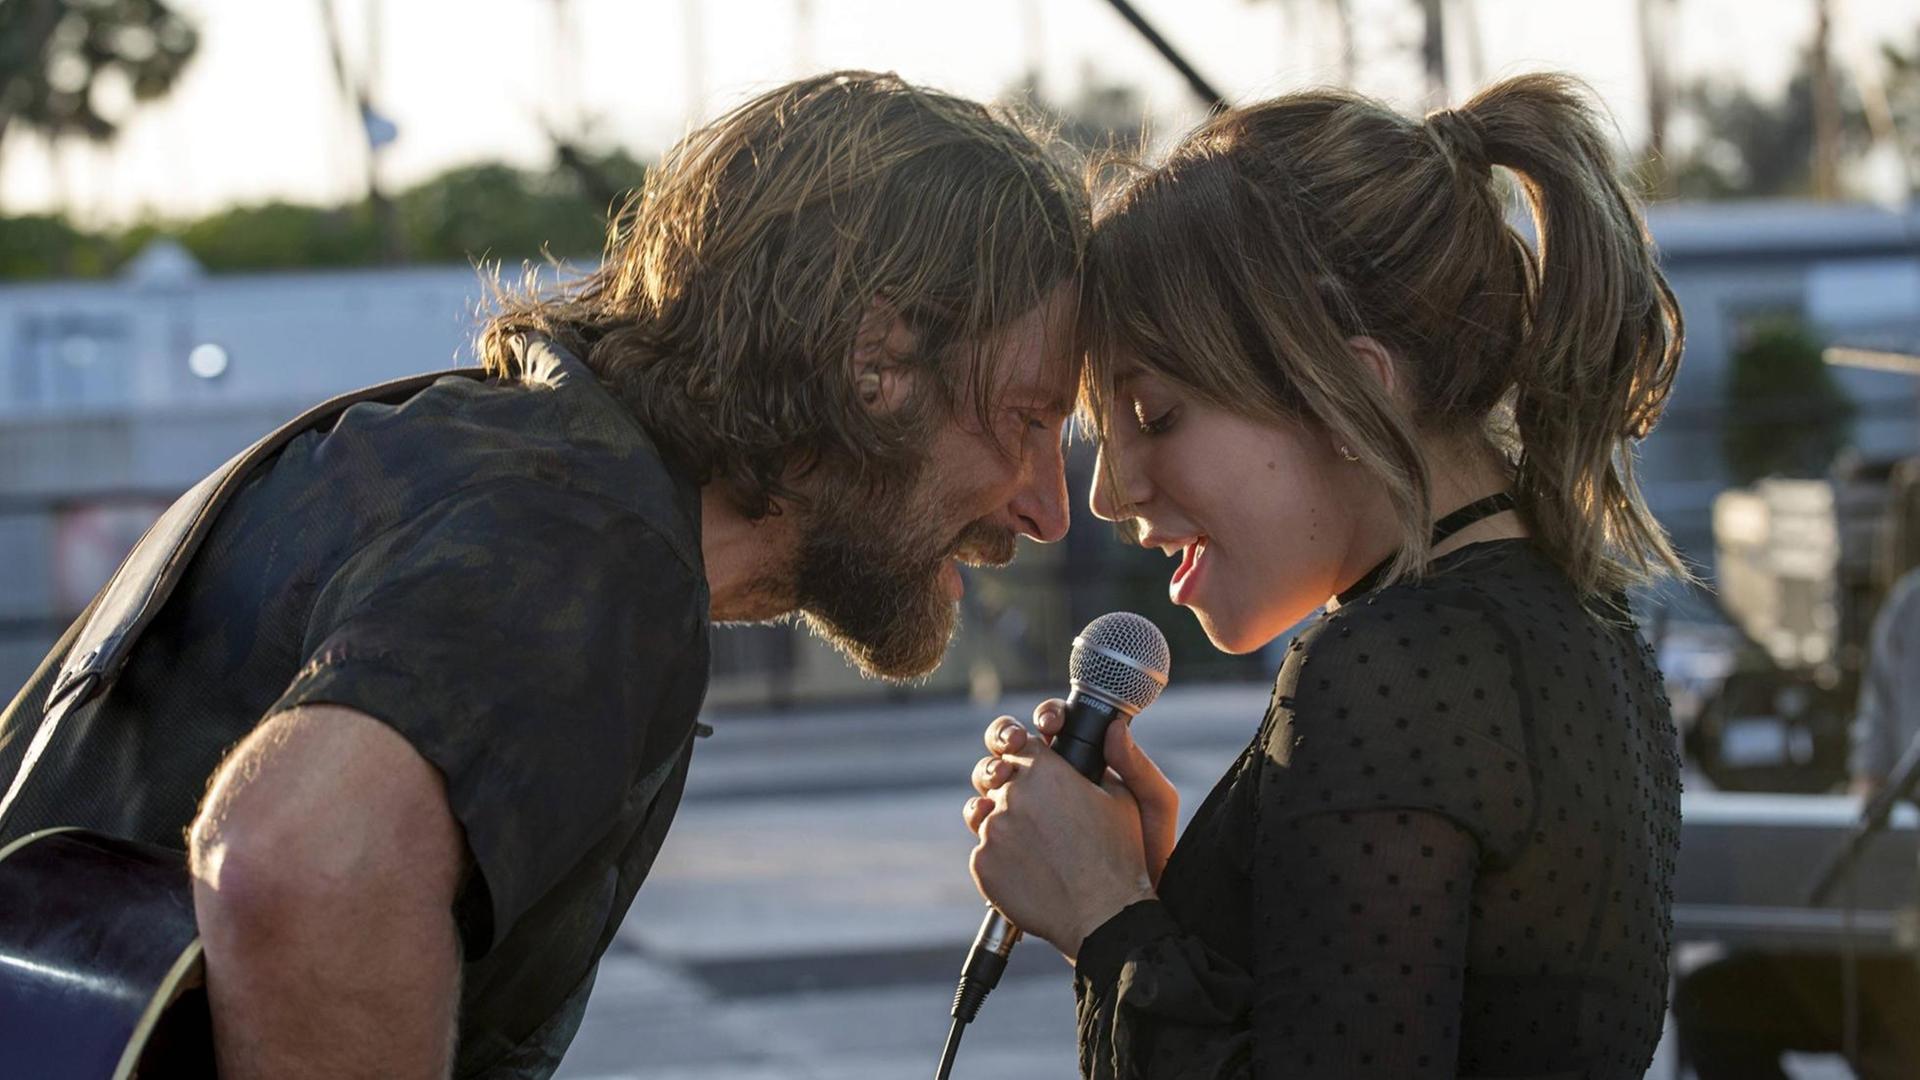 (L-R) BRADLEY COOPER as Jack and LADY GAGA as Ally in the drama A STAR IS BORN, from Warner Bros. Pictures, in association with Live Nation Productions and Metro Goldwyn Mayer Pictures, a Warner Bros. Pictures release. Los Angeles CA PUBLICATIONxINxGERxSUIxAUTxONLY Copyright: xNealxPrestonx 33659_006THA